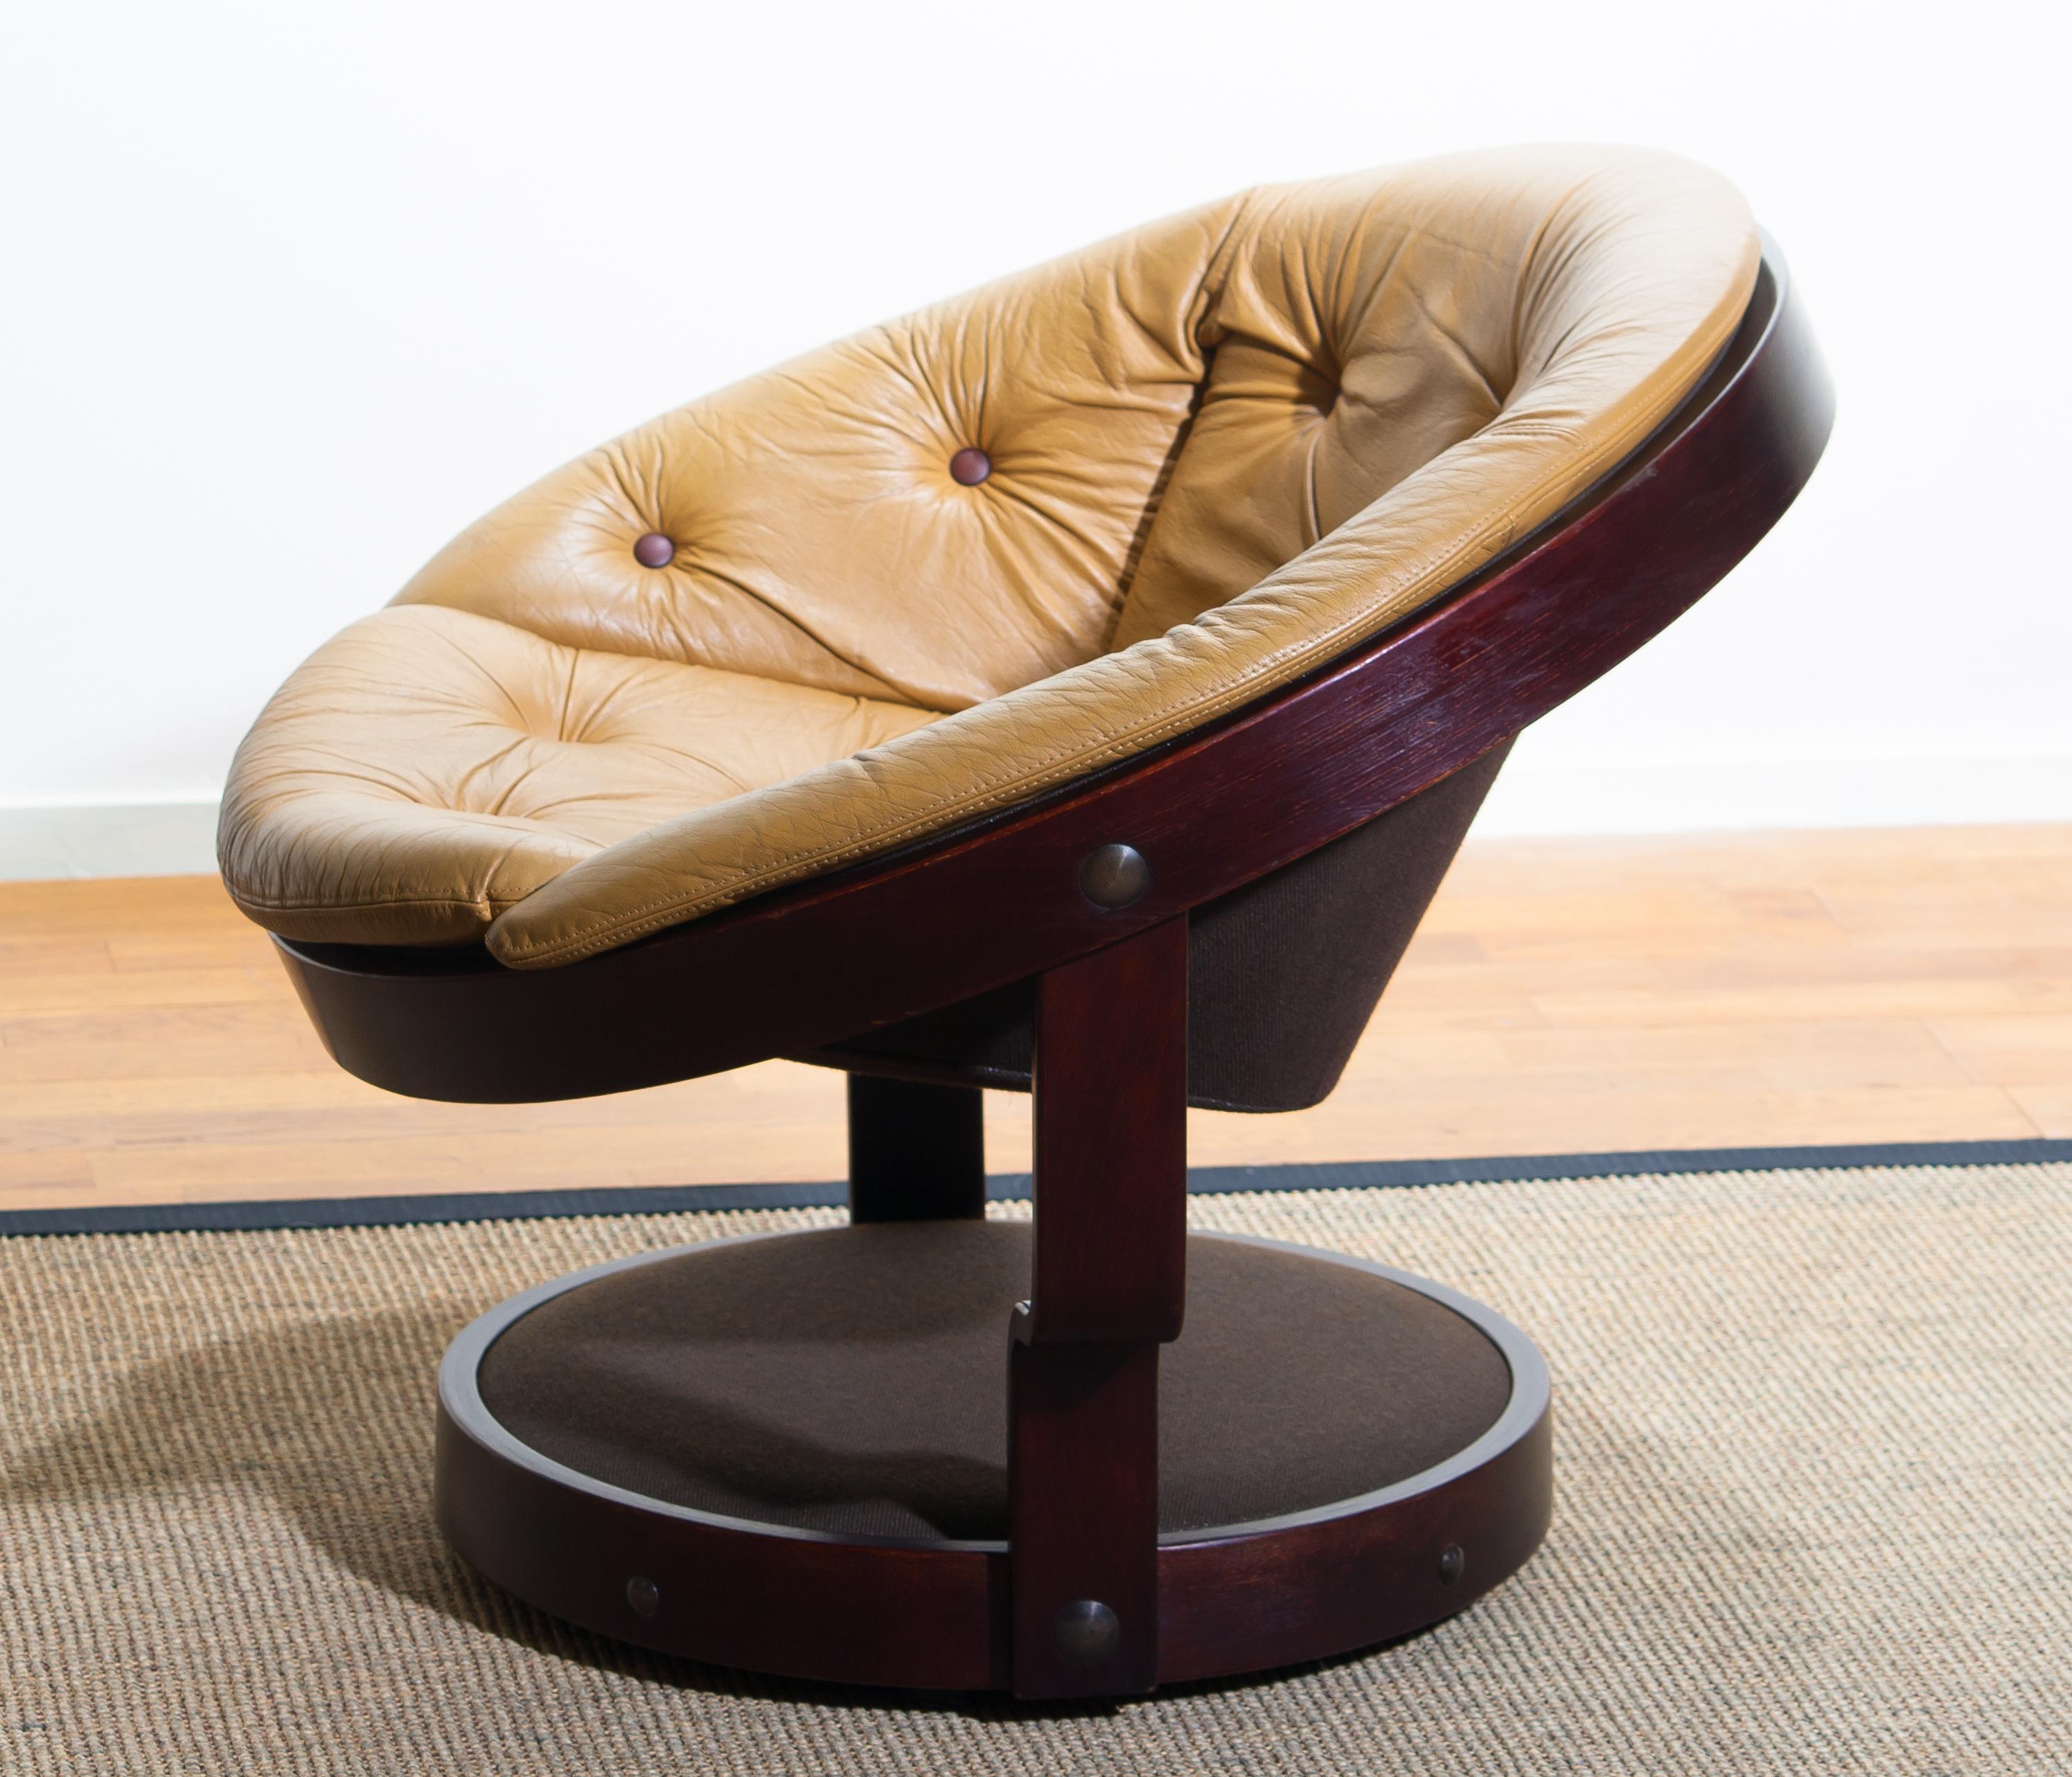 Beautiful circle shaped easy / lounge chair by Oddmund Vad for VAD Trevarefabrikk AS from Norway.
Designed in the 1970s.
This chair is in good condition.